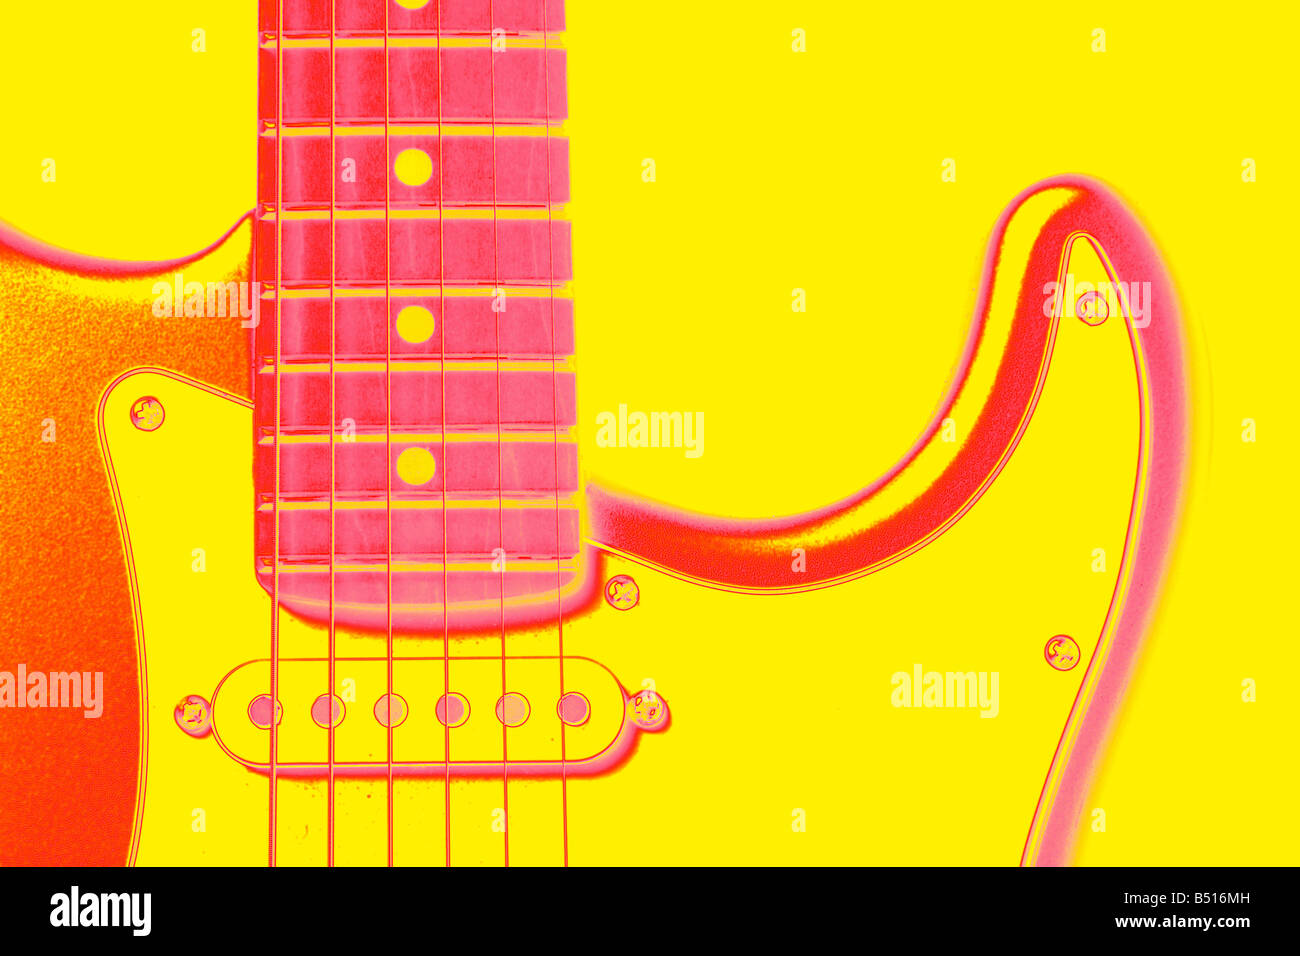 Digitally created image of a section of a Stratocaster electric guitar Stock Photo